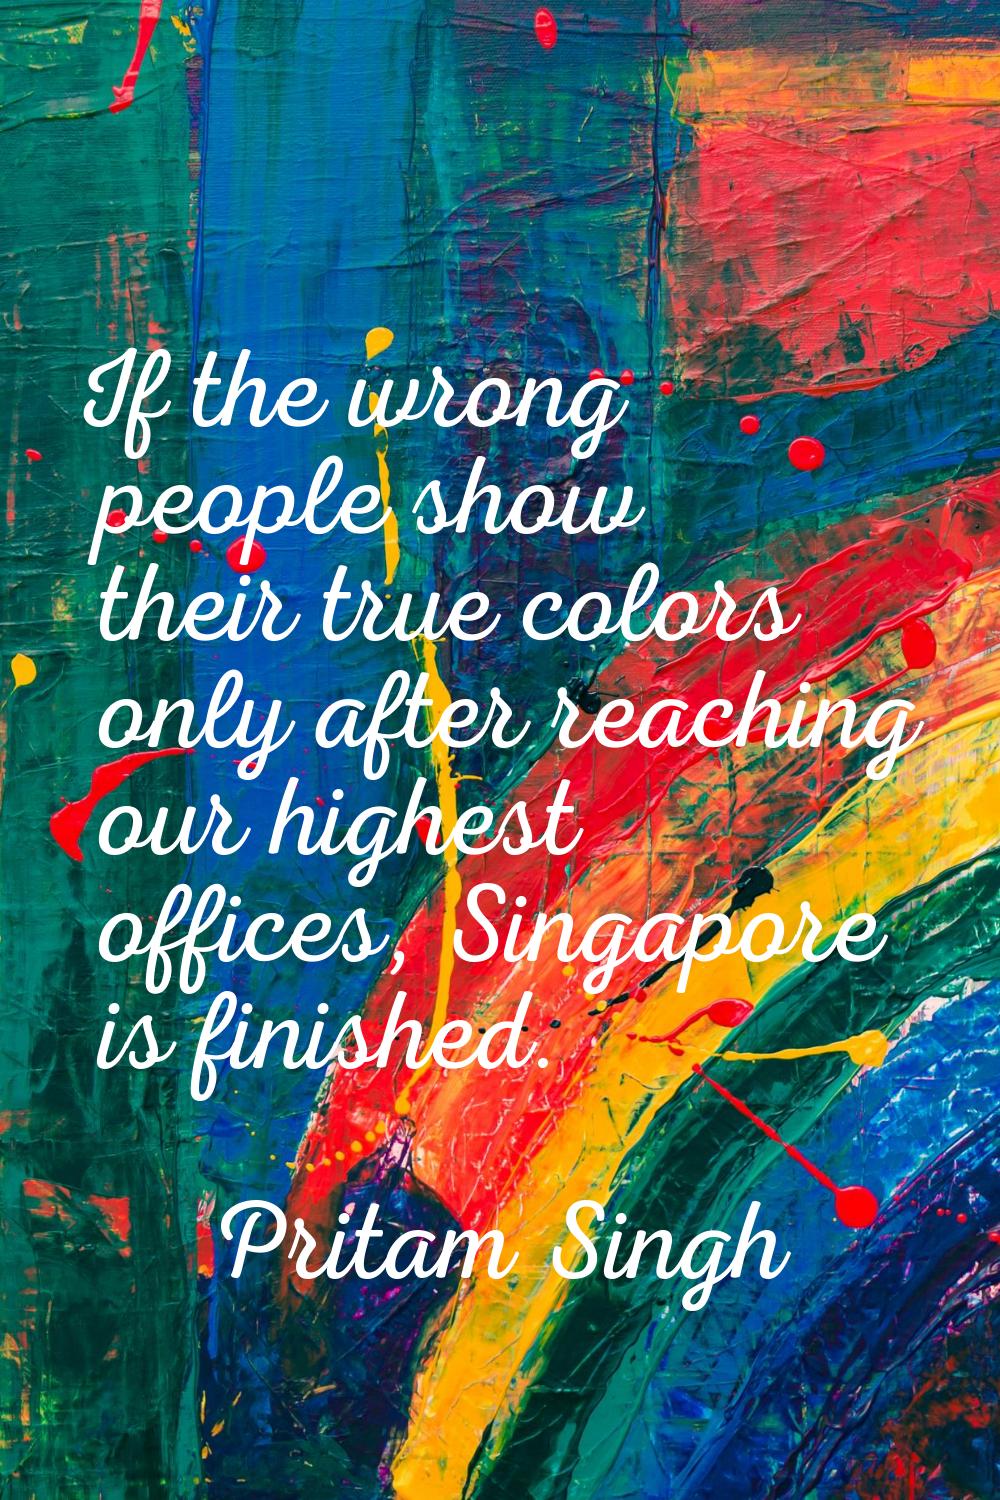 If the wrong people show their true colors only after reaching our highest offices, Singapore is fi